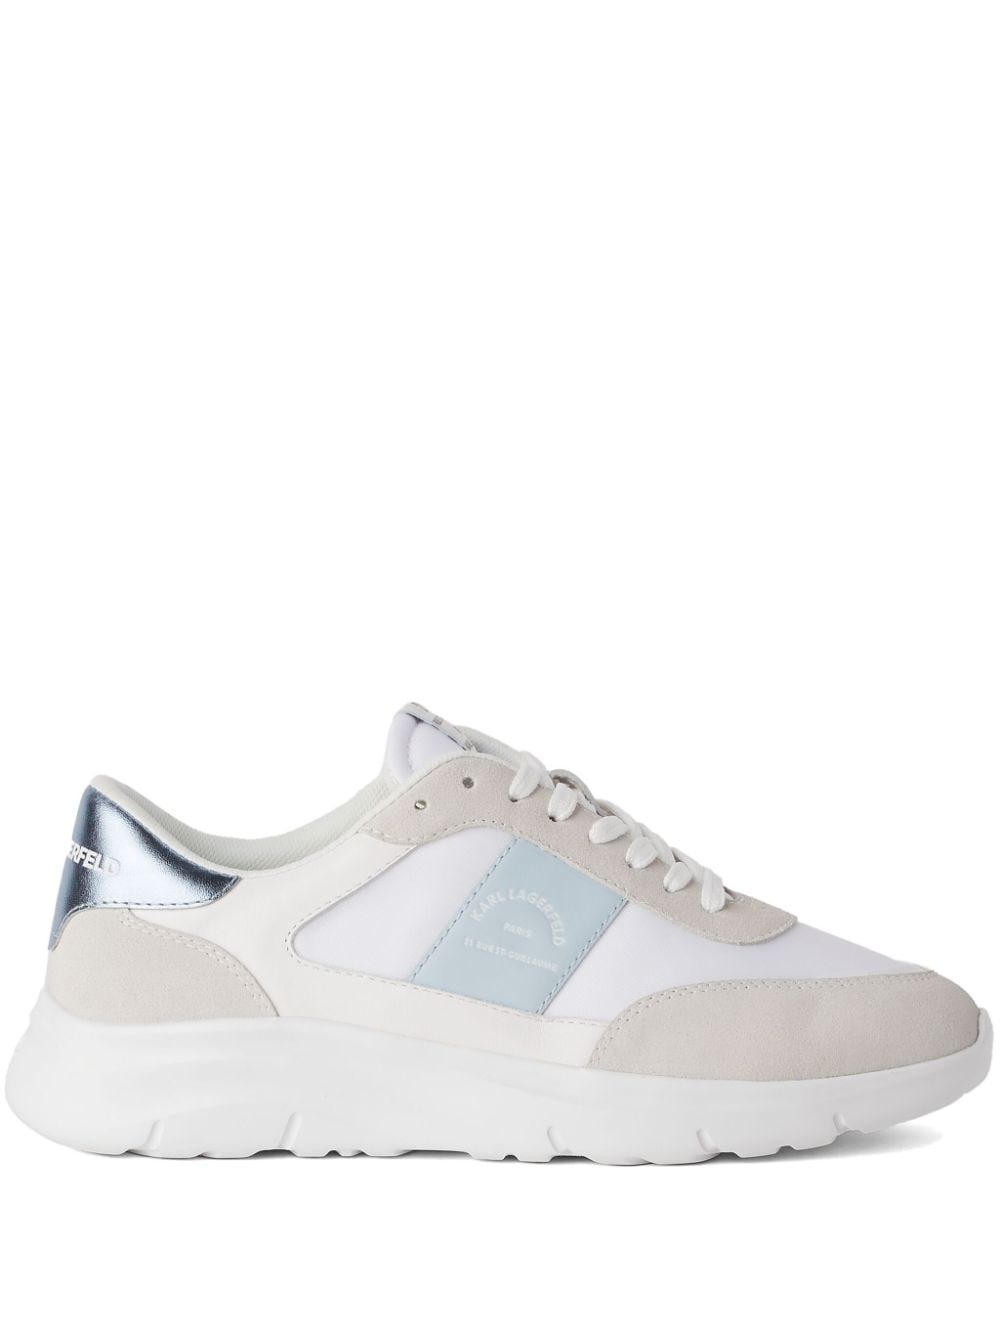 Karl Lagerfeld Serger Panelled Leather Sneakers In White